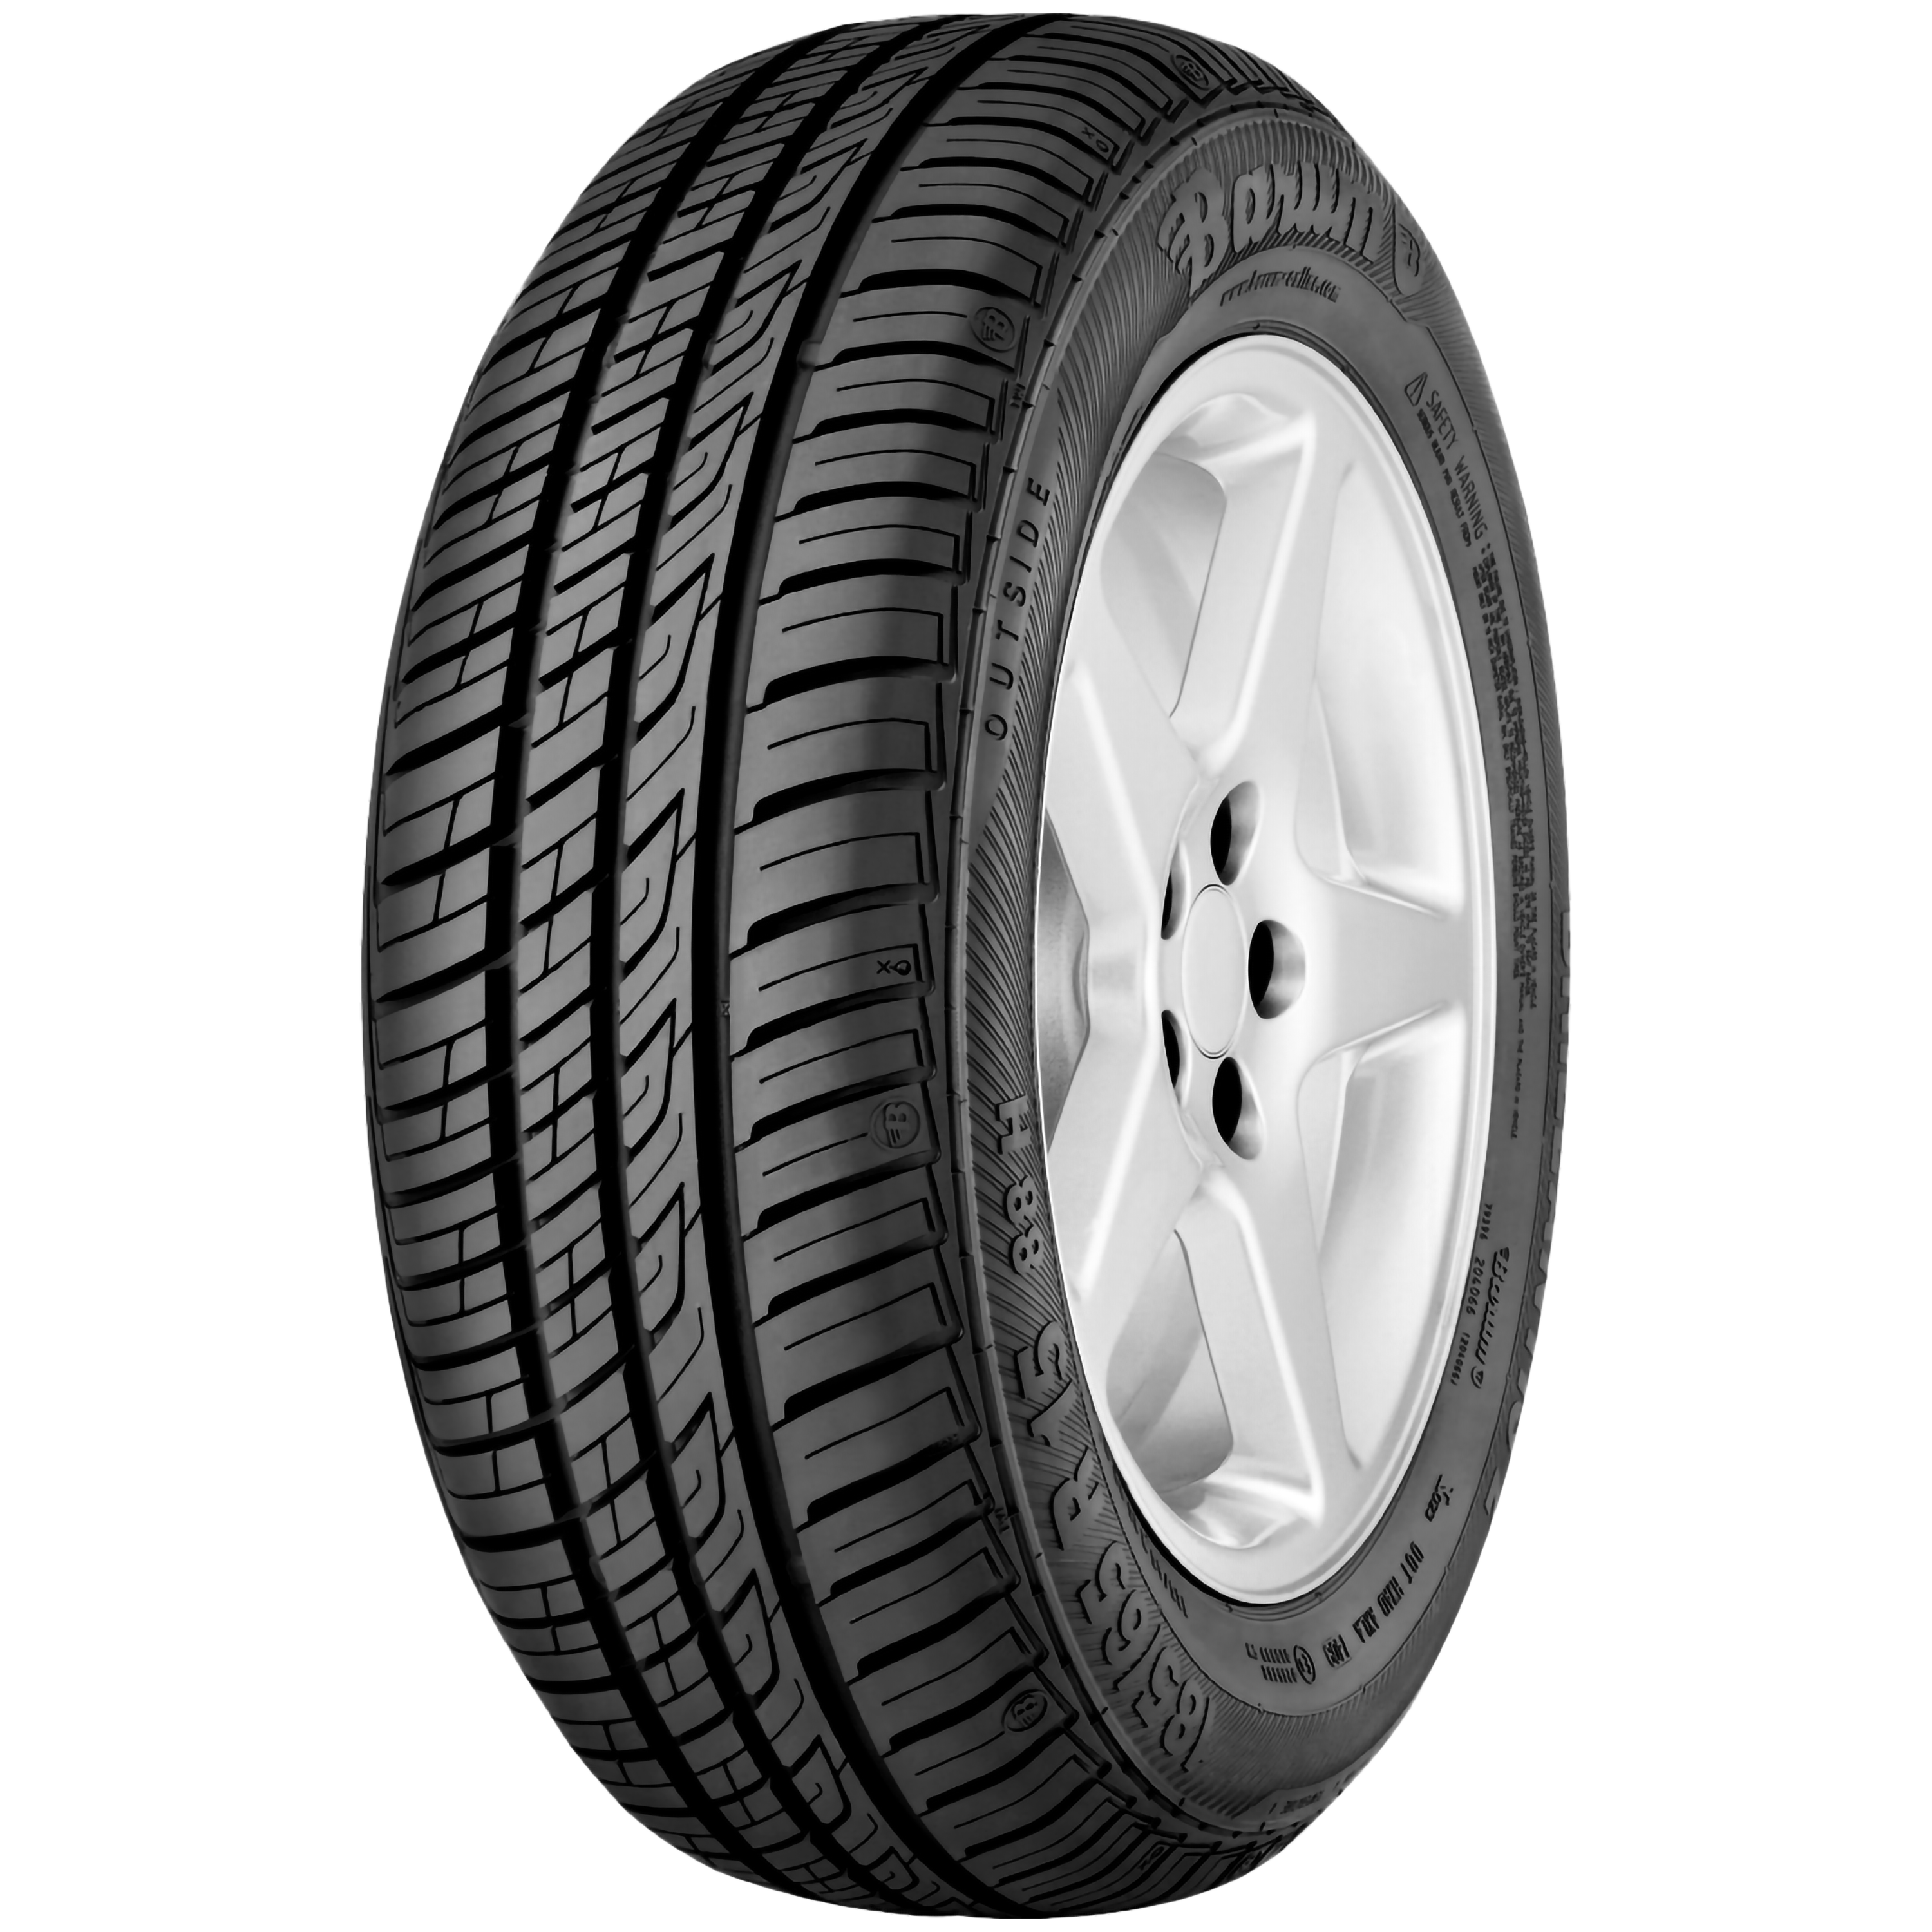 with long summer SUV | mileage high car Barum tyre for your & life The - Barum 2 Brillantis